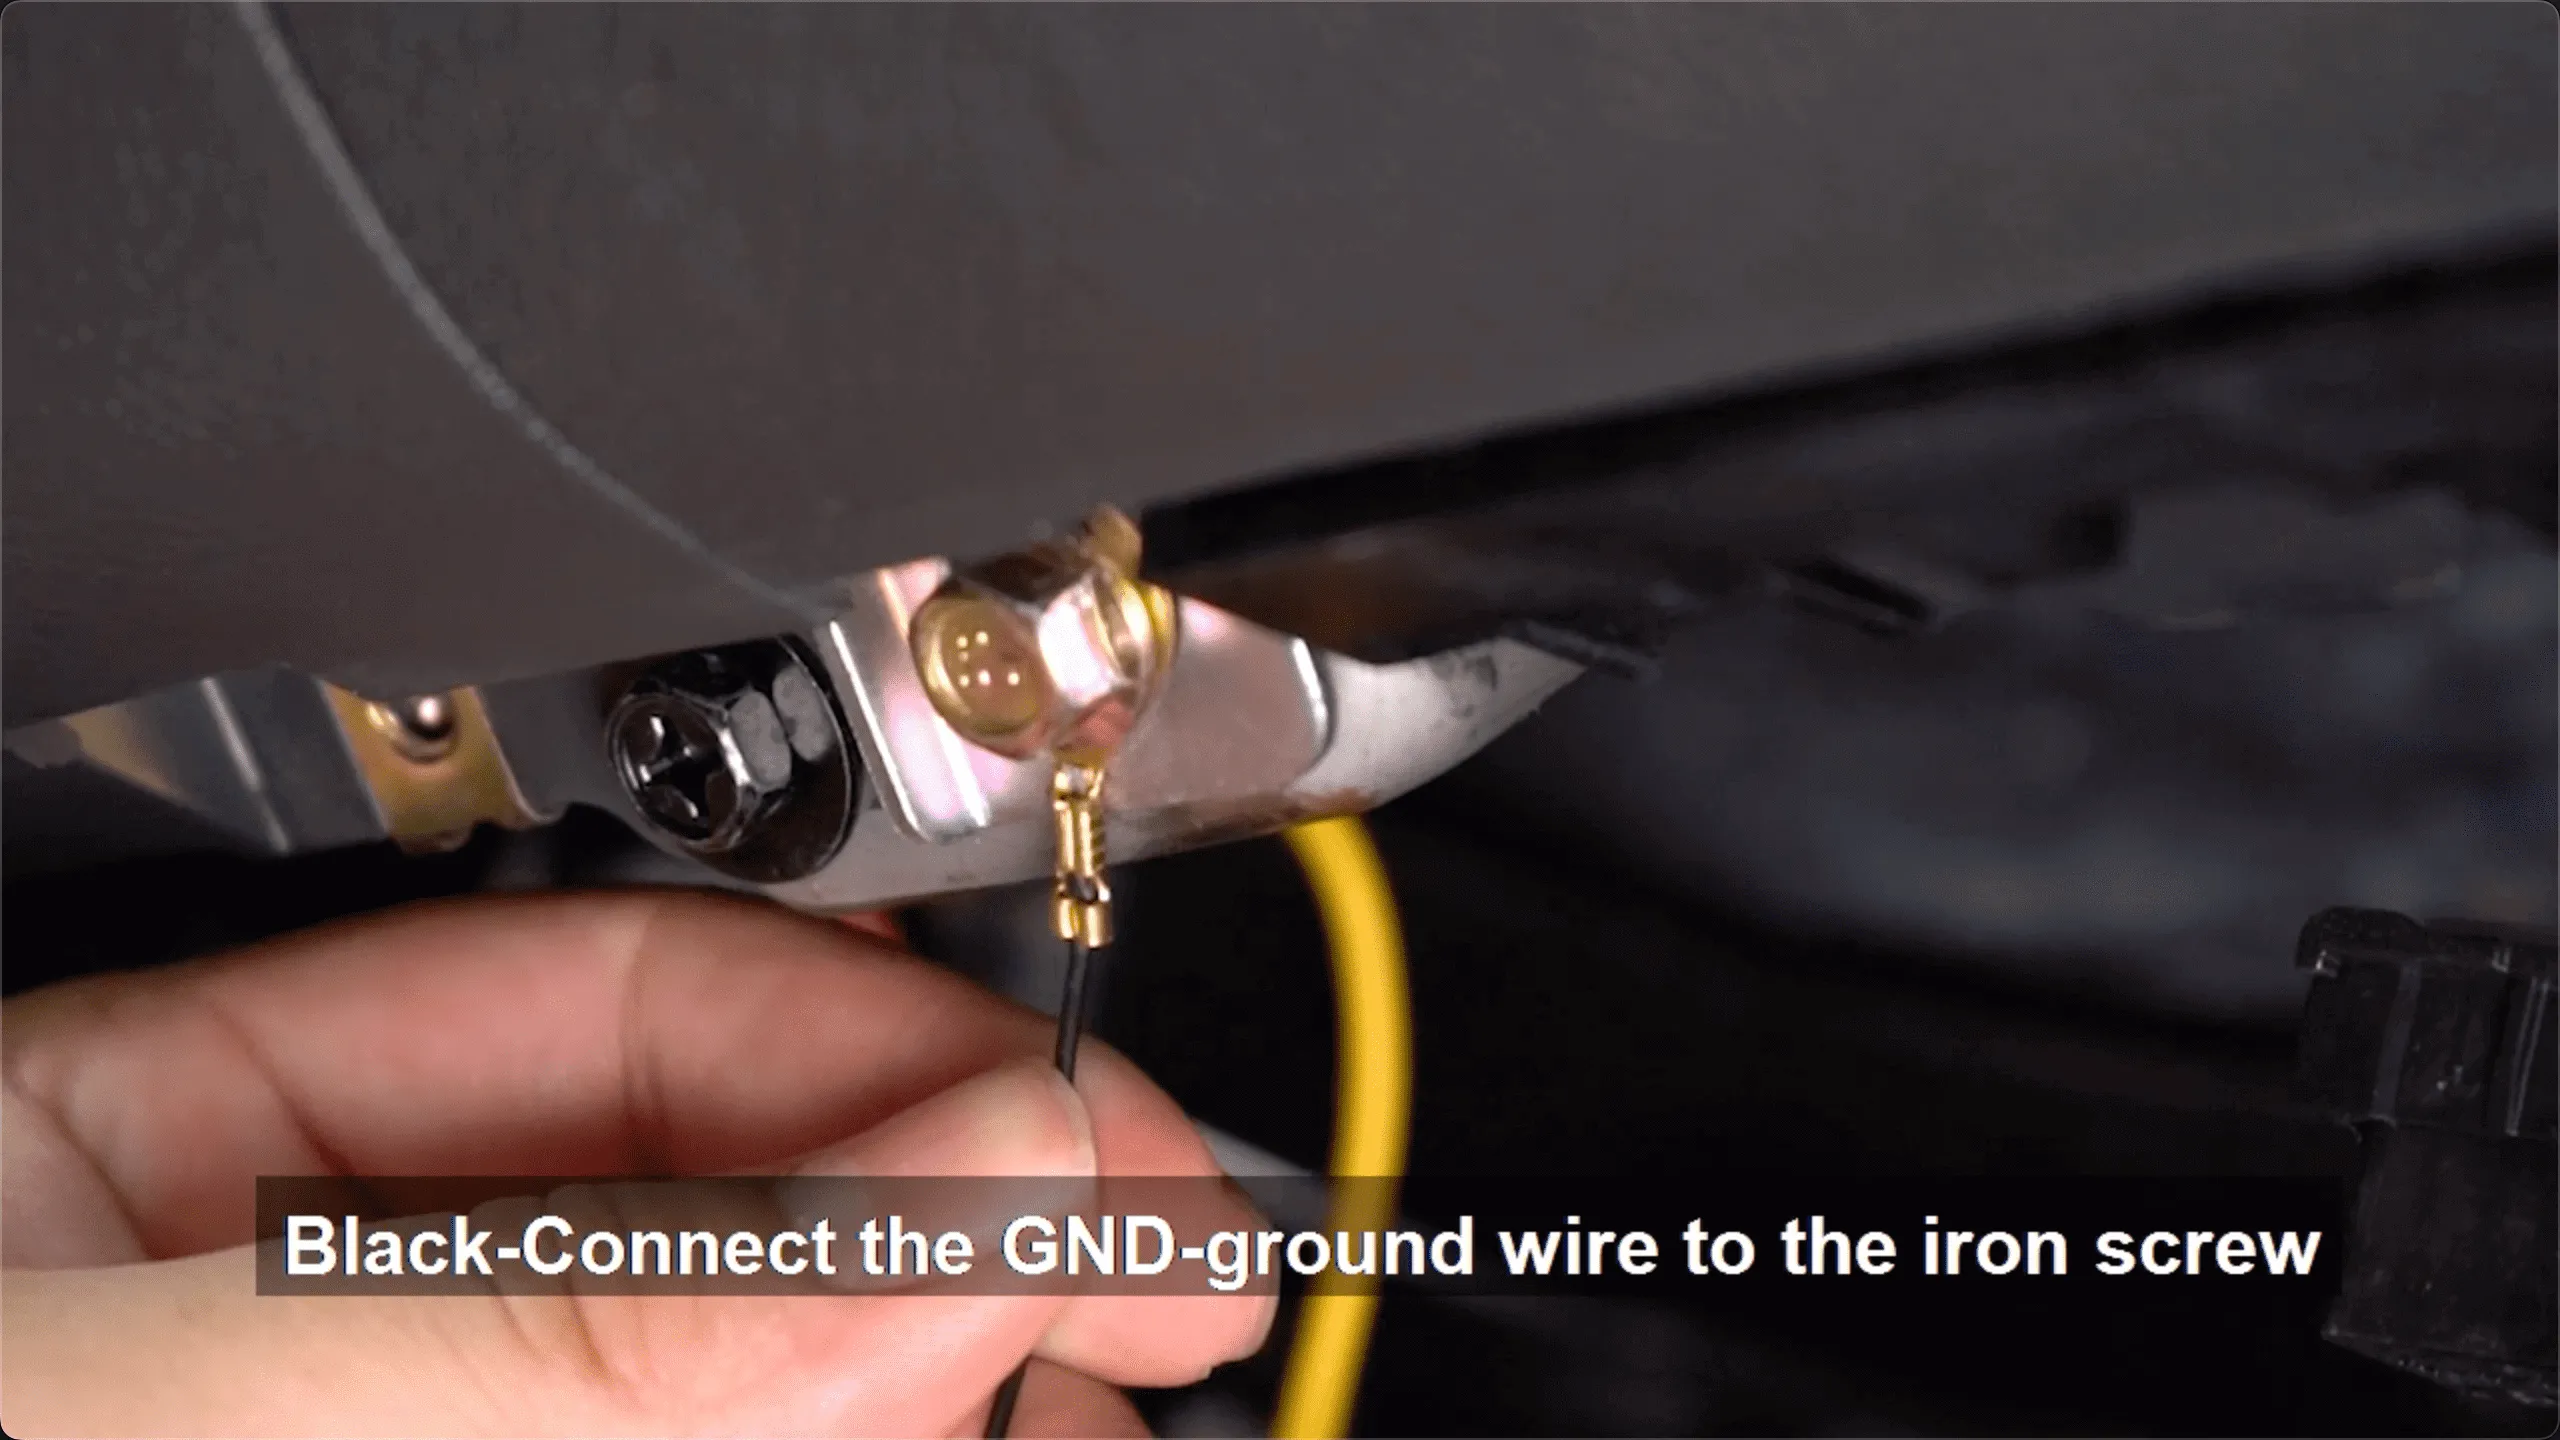 Connecting the GND ground wire to an iron screw on the car body.